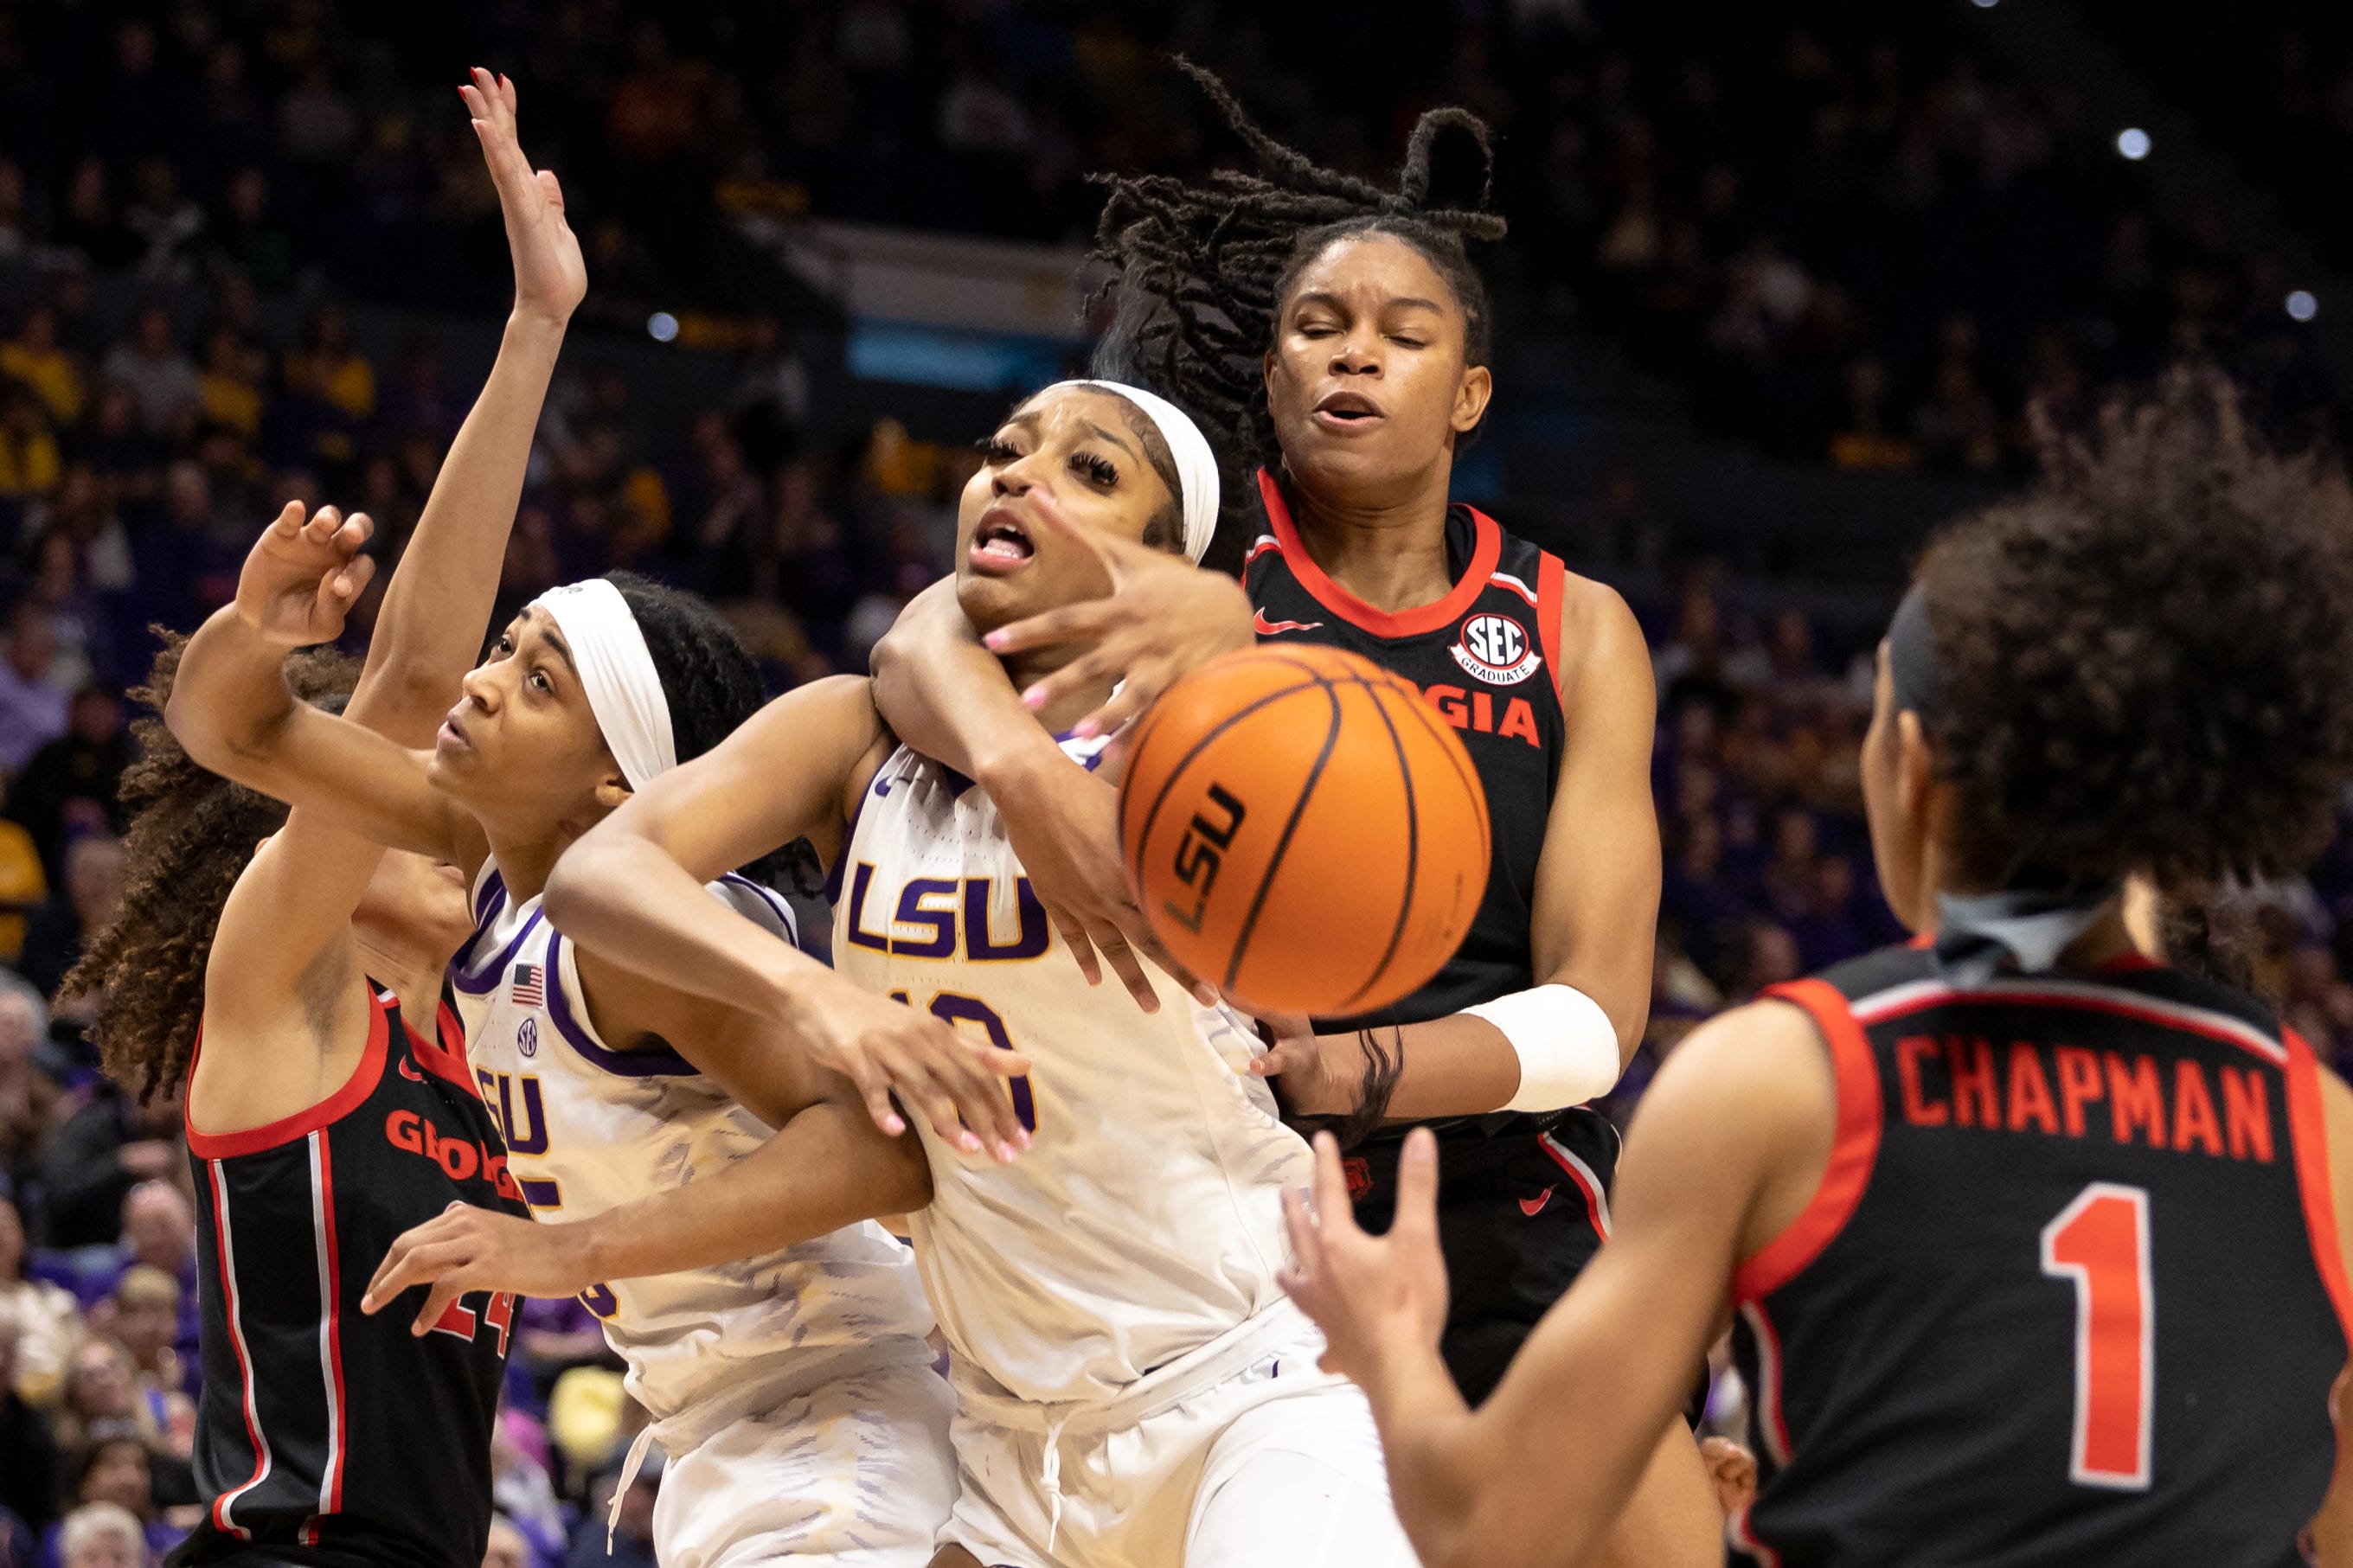 Feb 2, 2023; Baton Rouge, Louisiana, USA;  LSU Lady Tigers forward Angel Reese (10) is fouled by the Georgia Lady Bulldogs during the first half at Pete Maravich Assembly Center. Mandatory Credit: Stephen Lew-USA TODAY Sports